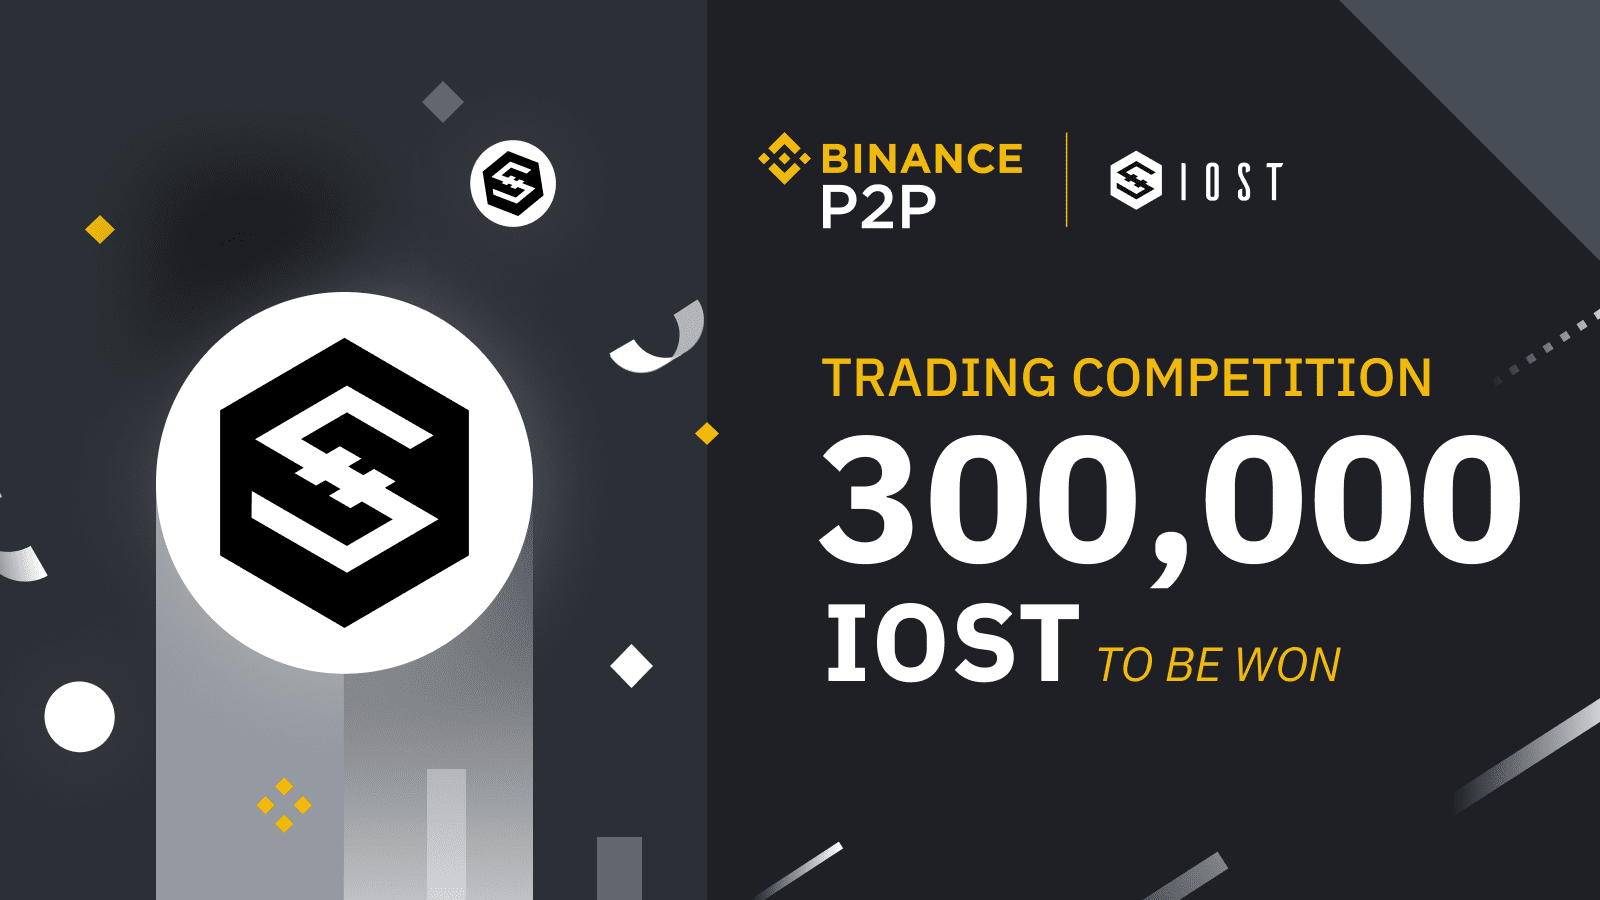 IOST exchange charts - price history, trade volume on popular markets